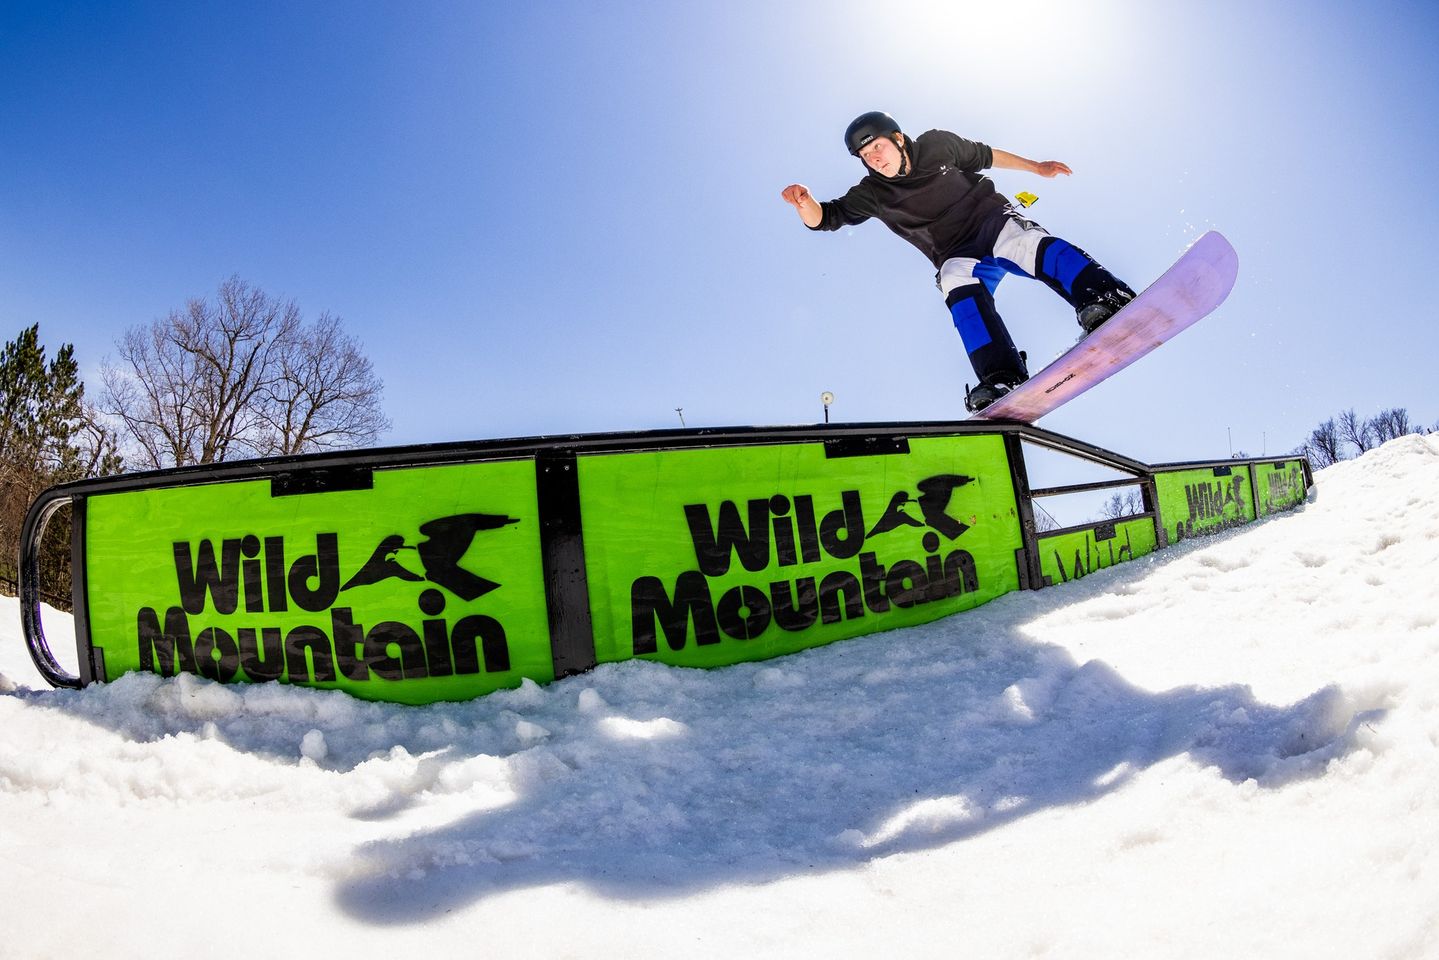 Wild Mountain snowboarder who's hungry for leftovers 